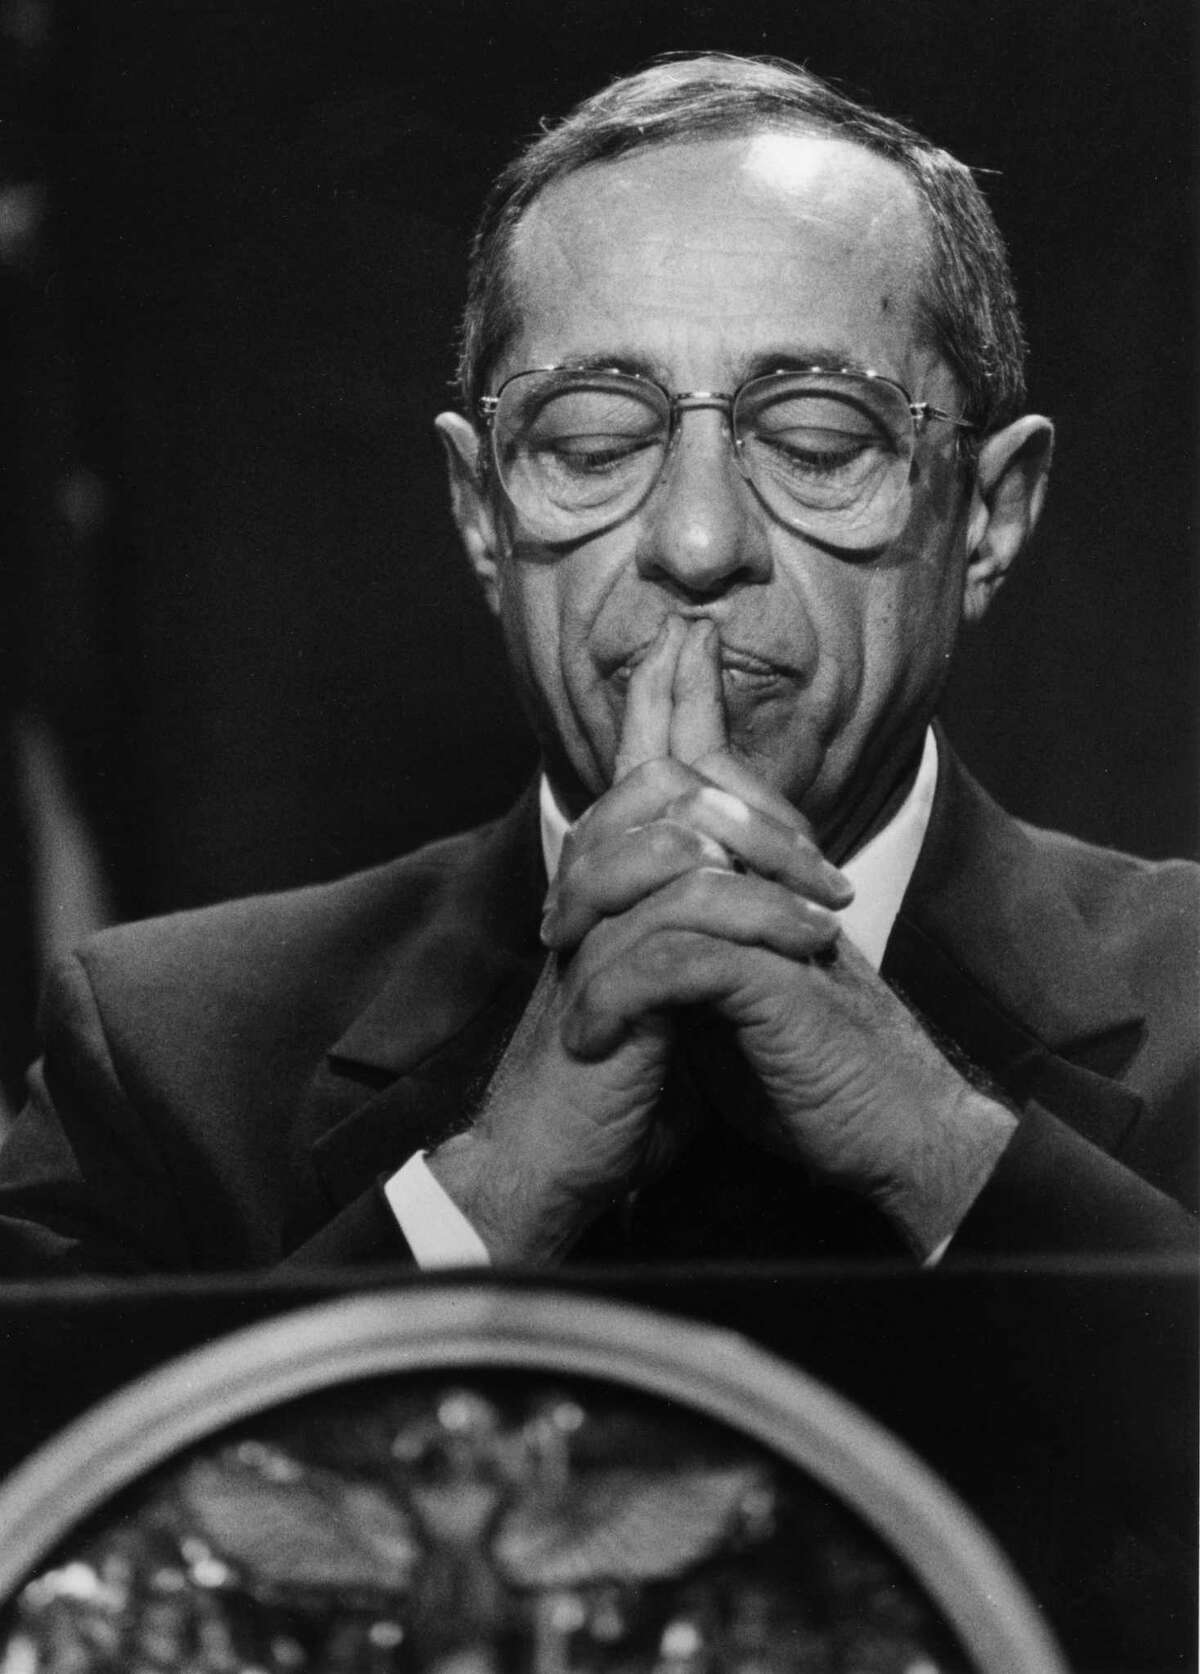 Gov. Mario Cuomo pauses in thought while providing an outline of the state's budget on Jan. 21, 1992, at the Capitol in Albany, N.Y. (Skip Dickstein/Times Union archive)